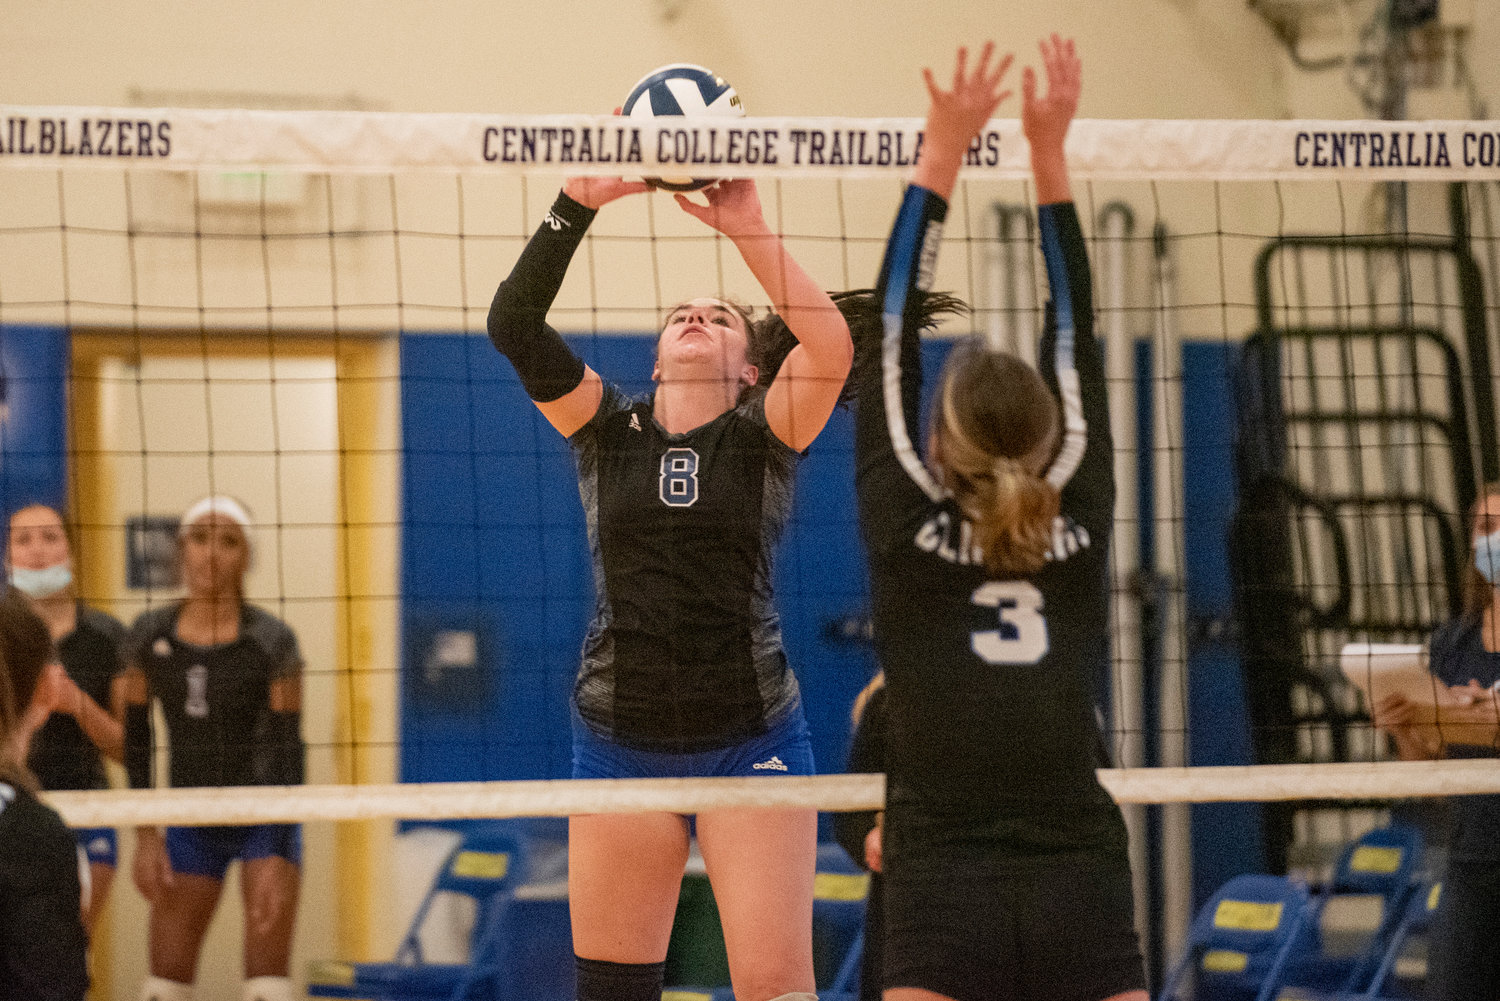 Centralia College's Jordyn Burks (8) sends the ball back over the net against South Puget Sound on Wednesday.